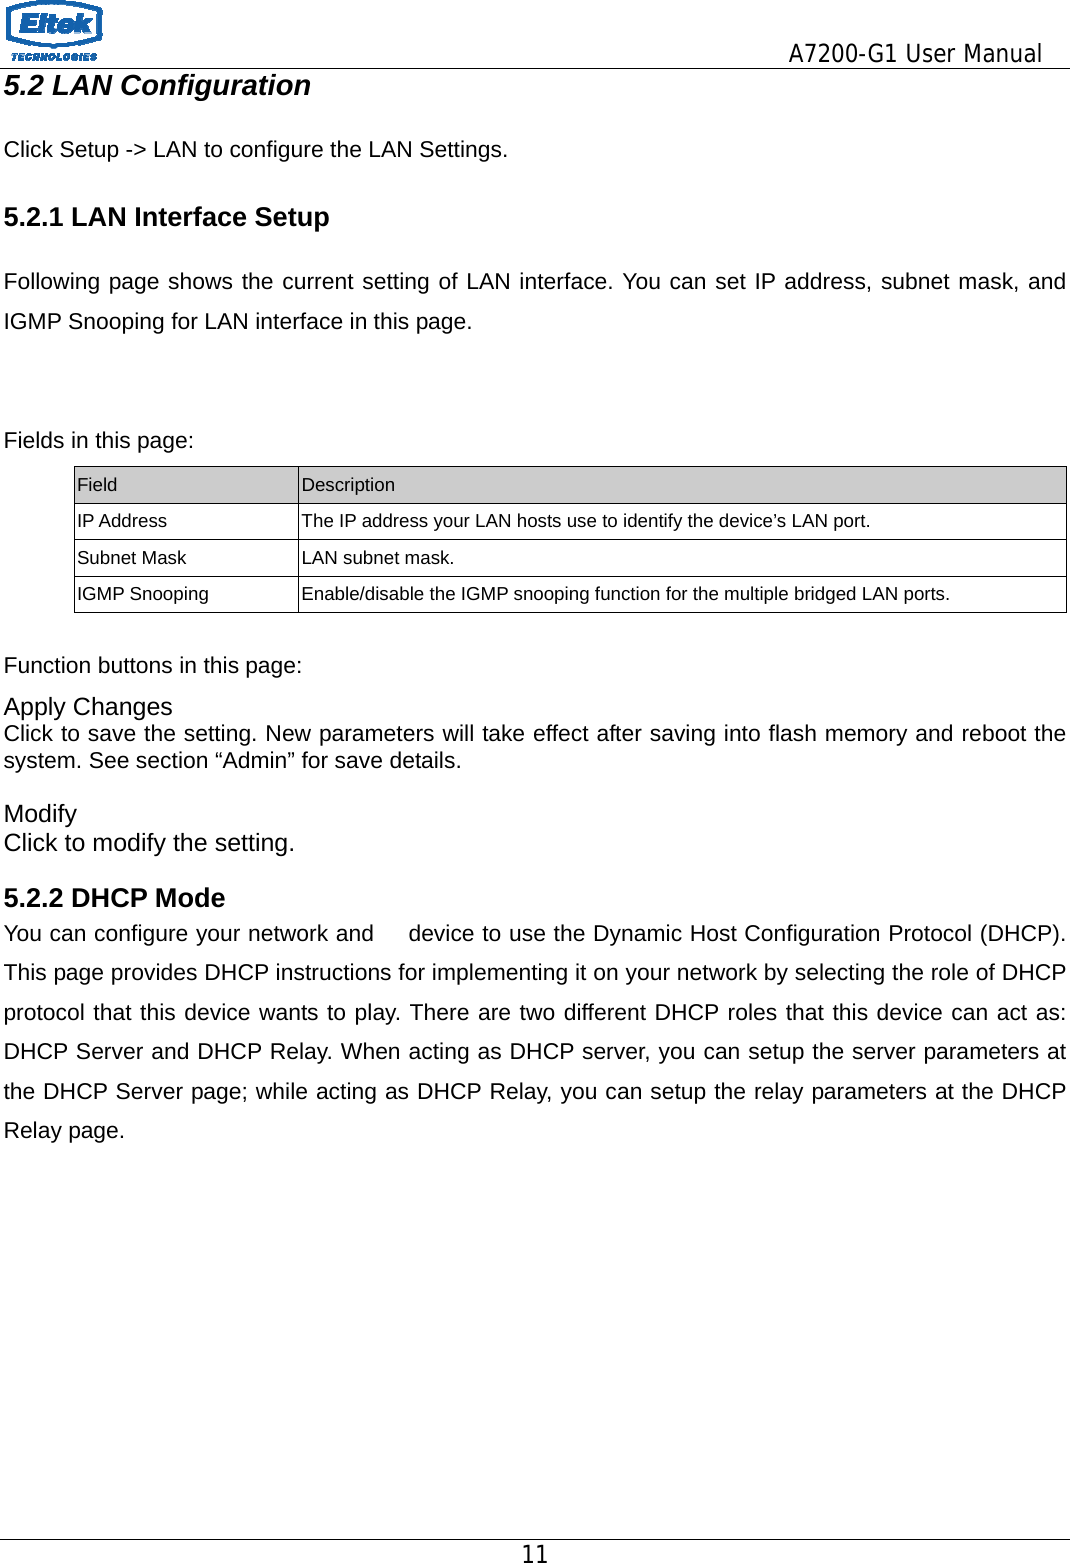                                         A7200-G1 User Manual 11  5.2 LAN Configuration  Click Setup -&gt; LAN to configure the LAN Settings. 5.2.1 LAN Interface Setup  Following page shows the current setting of LAN interface. You can set IP address, subnet mask, and IGMP Snooping for LAN interface in this page.   Fields in this page: Field  Description IP Address  The IP address your LAN hosts use to identify the device’s LAN port. Subnet Mask  LAN subnet mask. IGMP Snooping  Enable/disable the IGMP snooping function for the multiple bridged LAN ports.  Function buttons in this page: Apply Changes Click to save the setting. New parameters will take effect after saving into flash memory and reboot the system. See section “Admin” for save details.  Modify Click to modify the setting.       5.2.2 DHCP Mode You can configure your network and      device to use the Dynamic Host Configuration Protocol (DHCP). This page provides DHCP instructions for implementing it on your network by selecting the role of DHCP protocol that this device wants to play. There are two different DHCP roles that this device can act as: DHCP Server and DHCP Relay. When acting as DHCP server, you can setup the server parameters at the DHCP Server page; while acting as DHCP Relay, you can setup the relay parameters at the DHCP Relay page.          